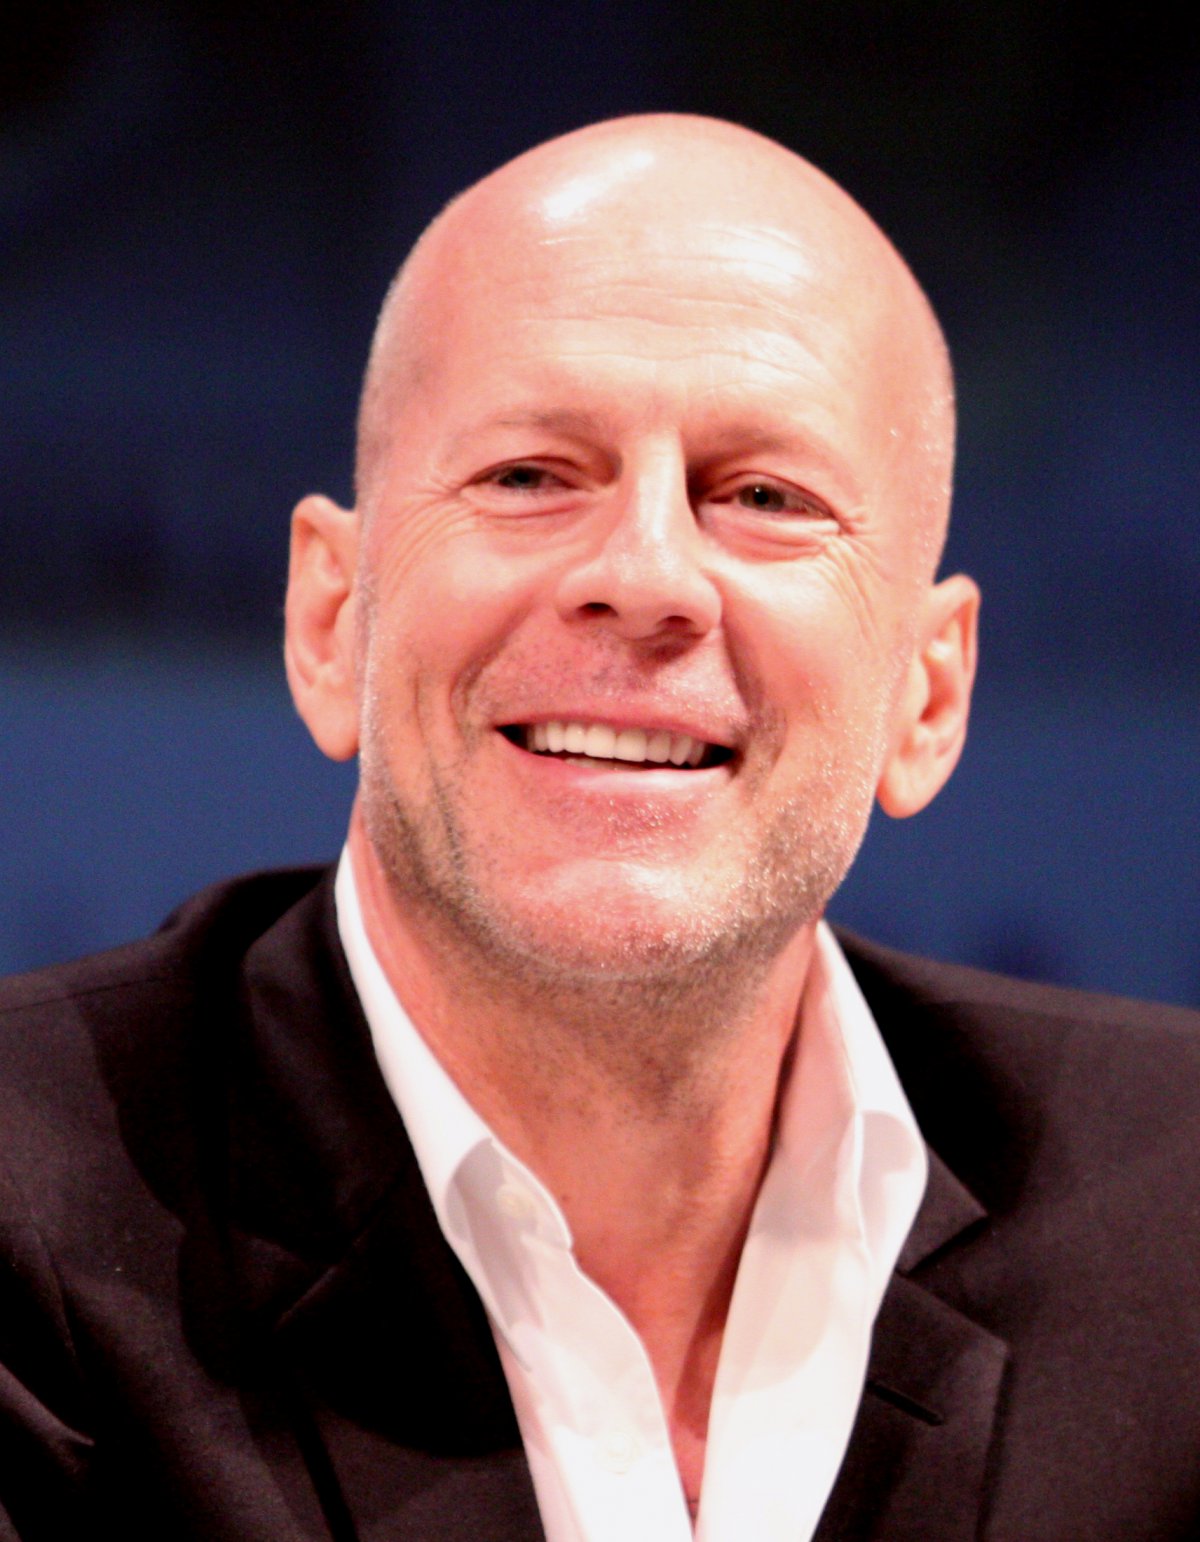 Bruce Willis and wife Emma Hemming welcome a new baby girl - Reality TV World1200 x 1542